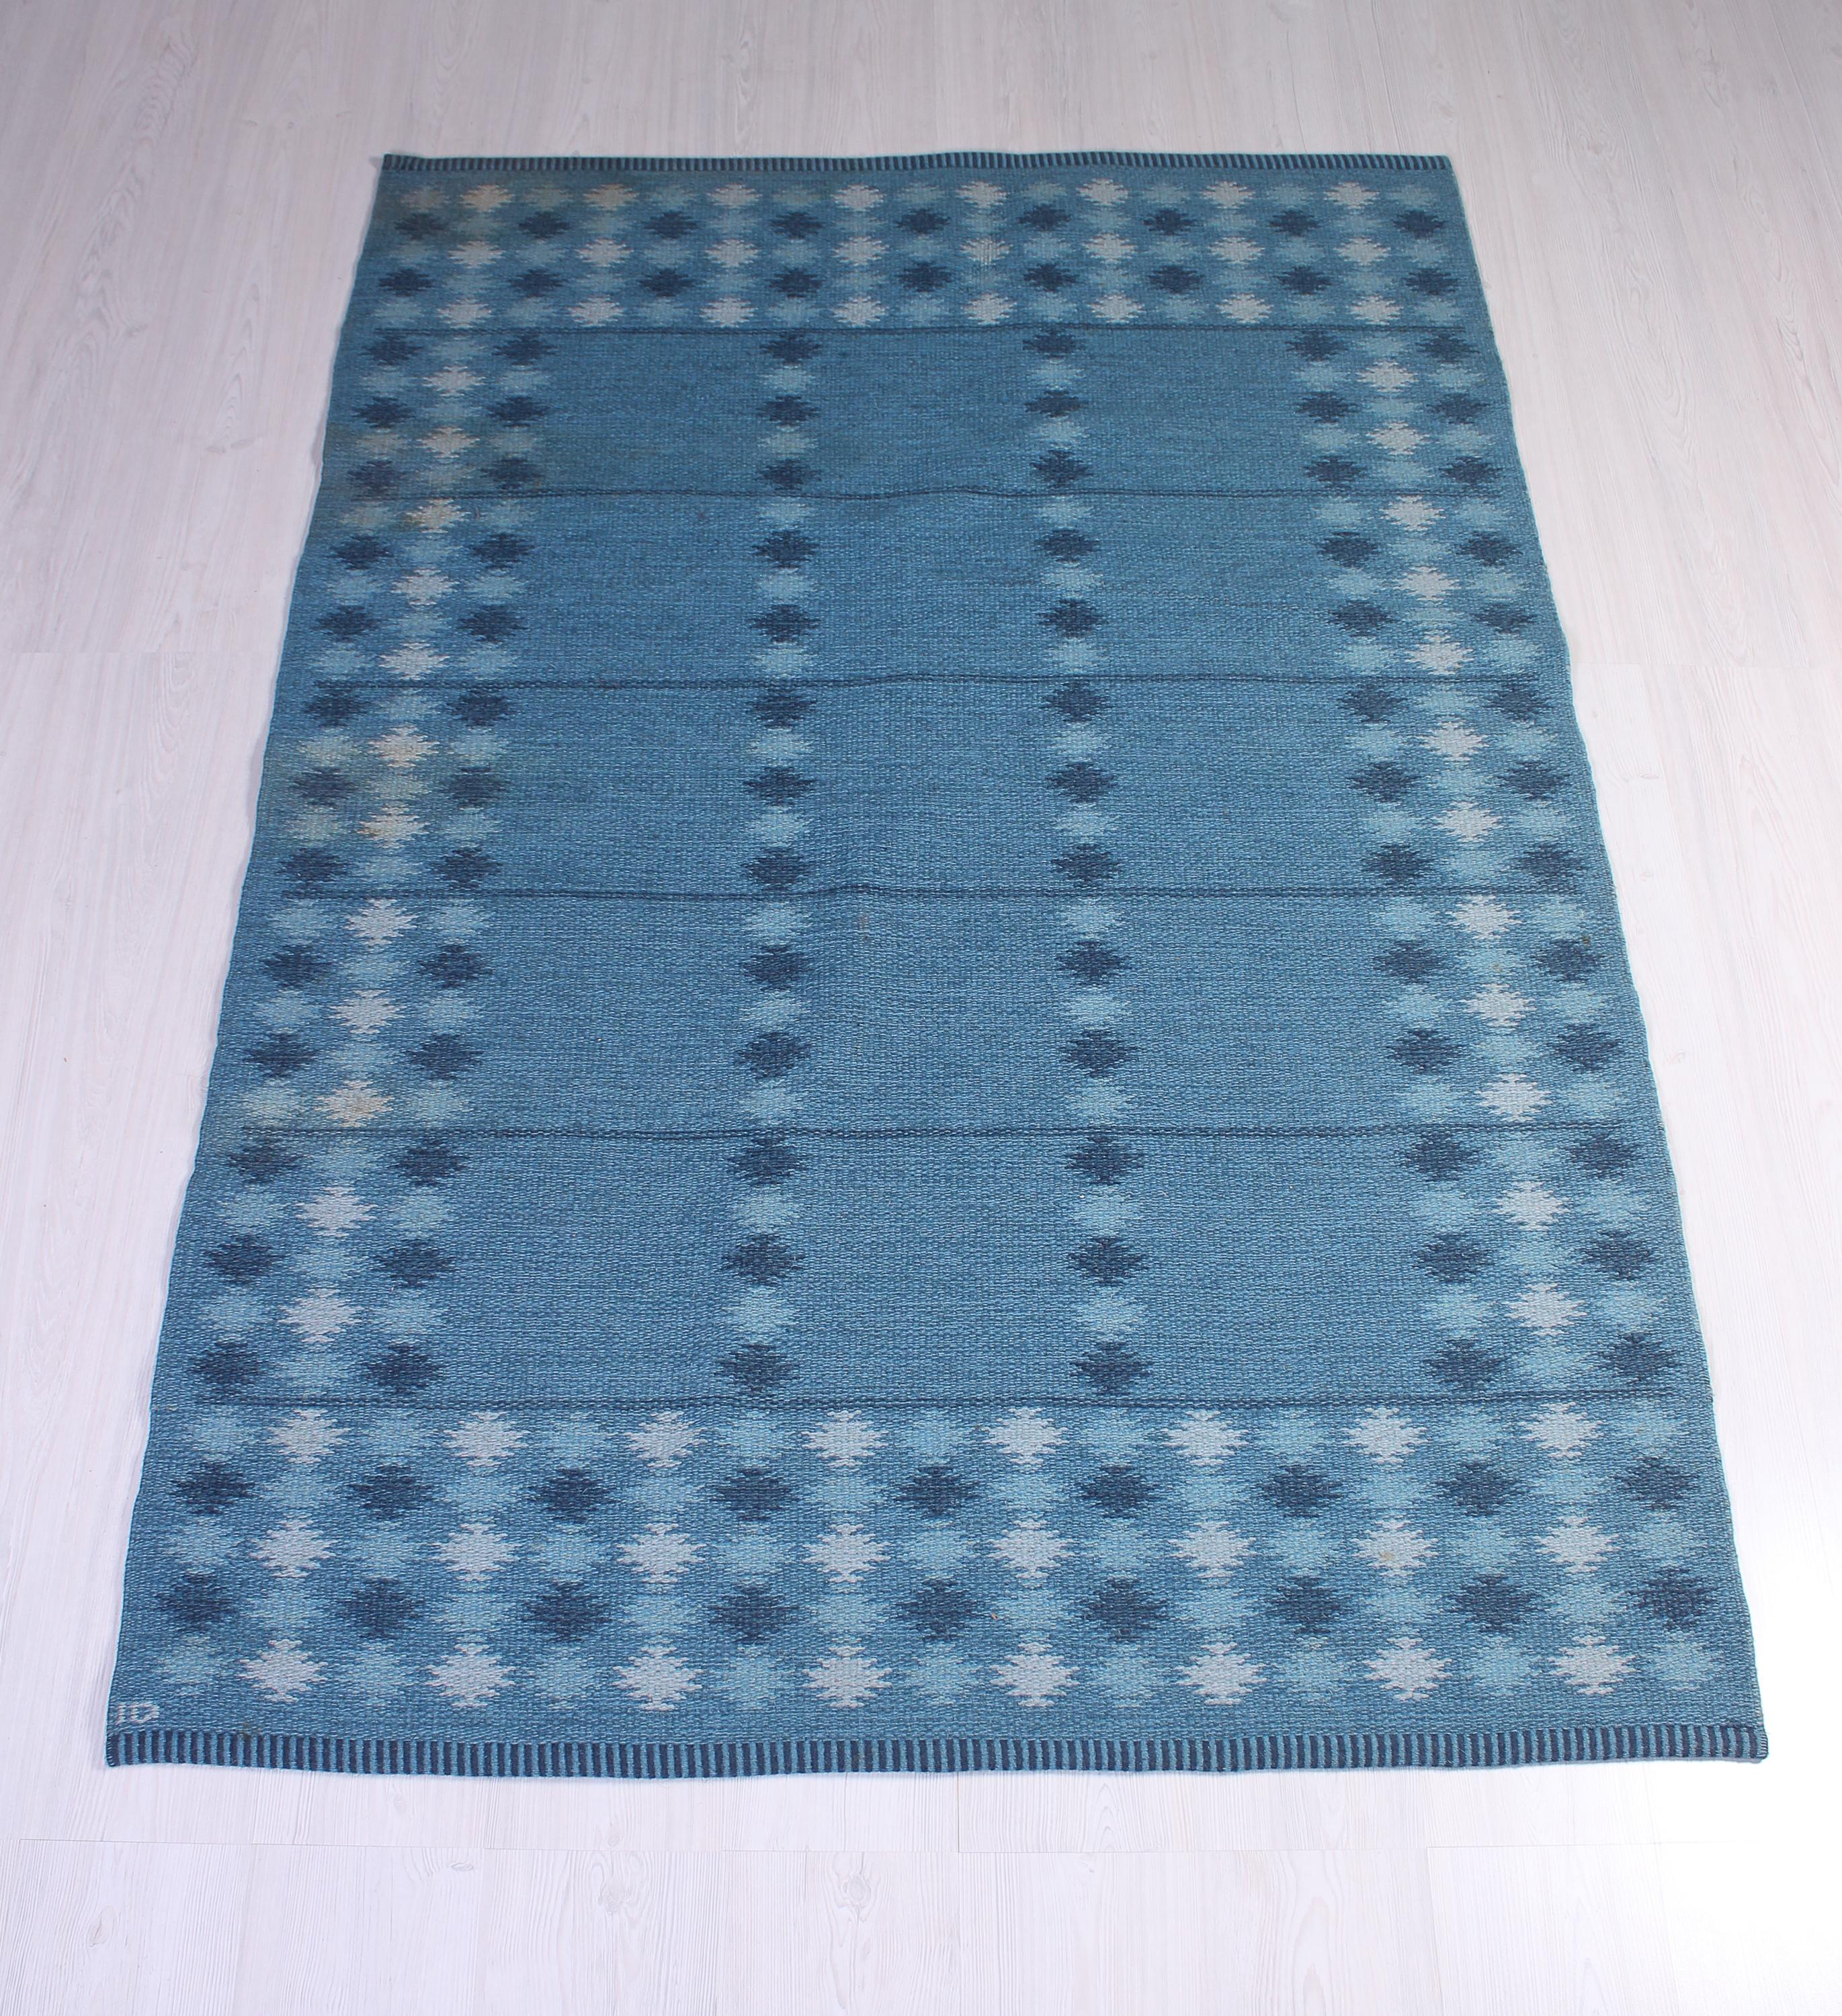 A midcentury Swedish flat-weave carpet by Ingrid Dessau. The carpet has a beautiful blue base with patterns in dark blue, light blue and white. The carpet is in very good vintage condition without any damages. There are some minor signs of usage but